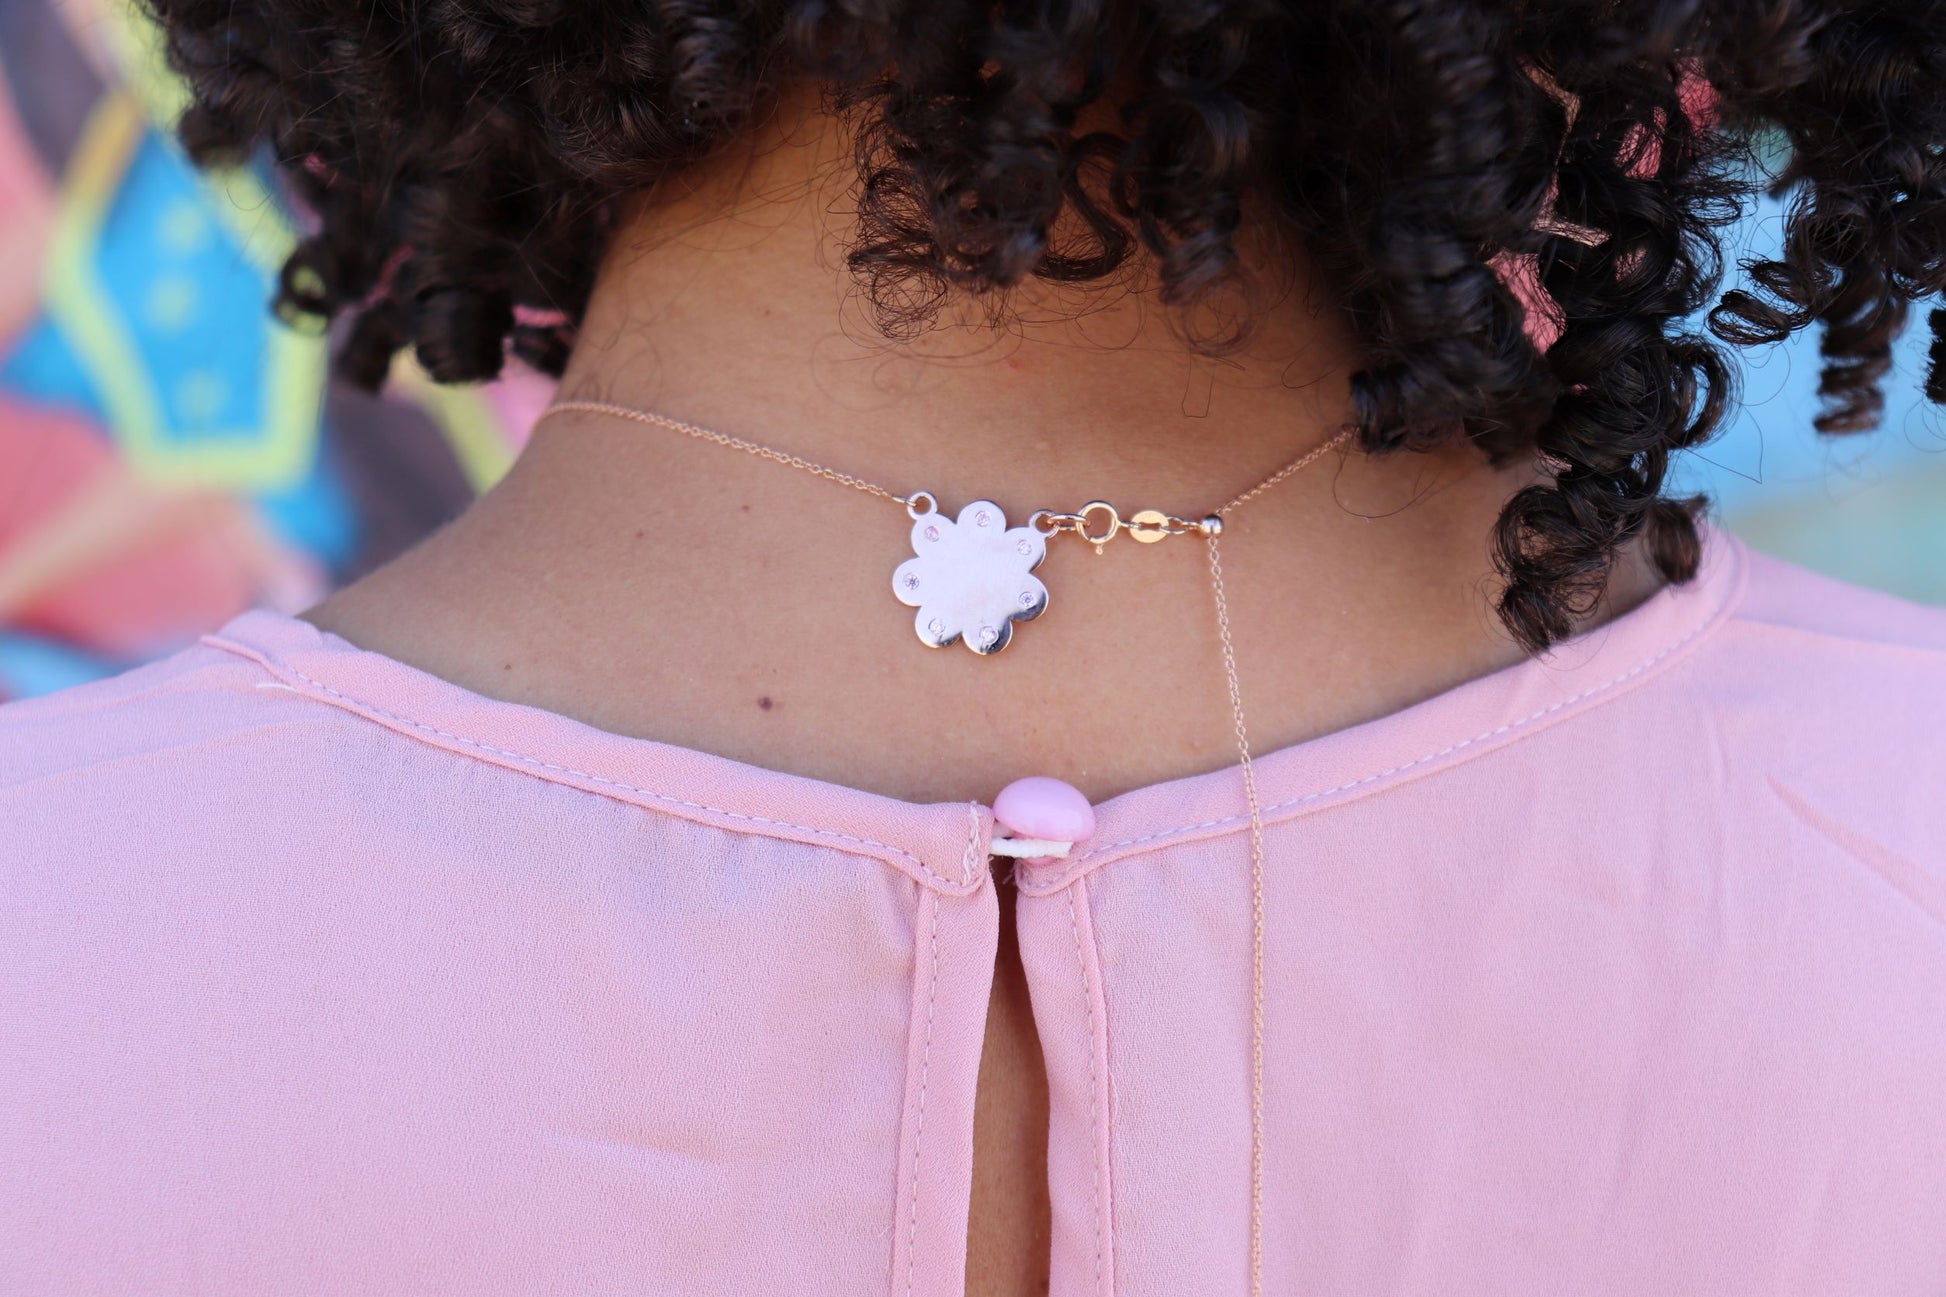 black woman with curly hair in a pink top  turned away from the camera wearing a Seven diamond logo charm on a gold cloud with seven diamonds set evenly around the cloud